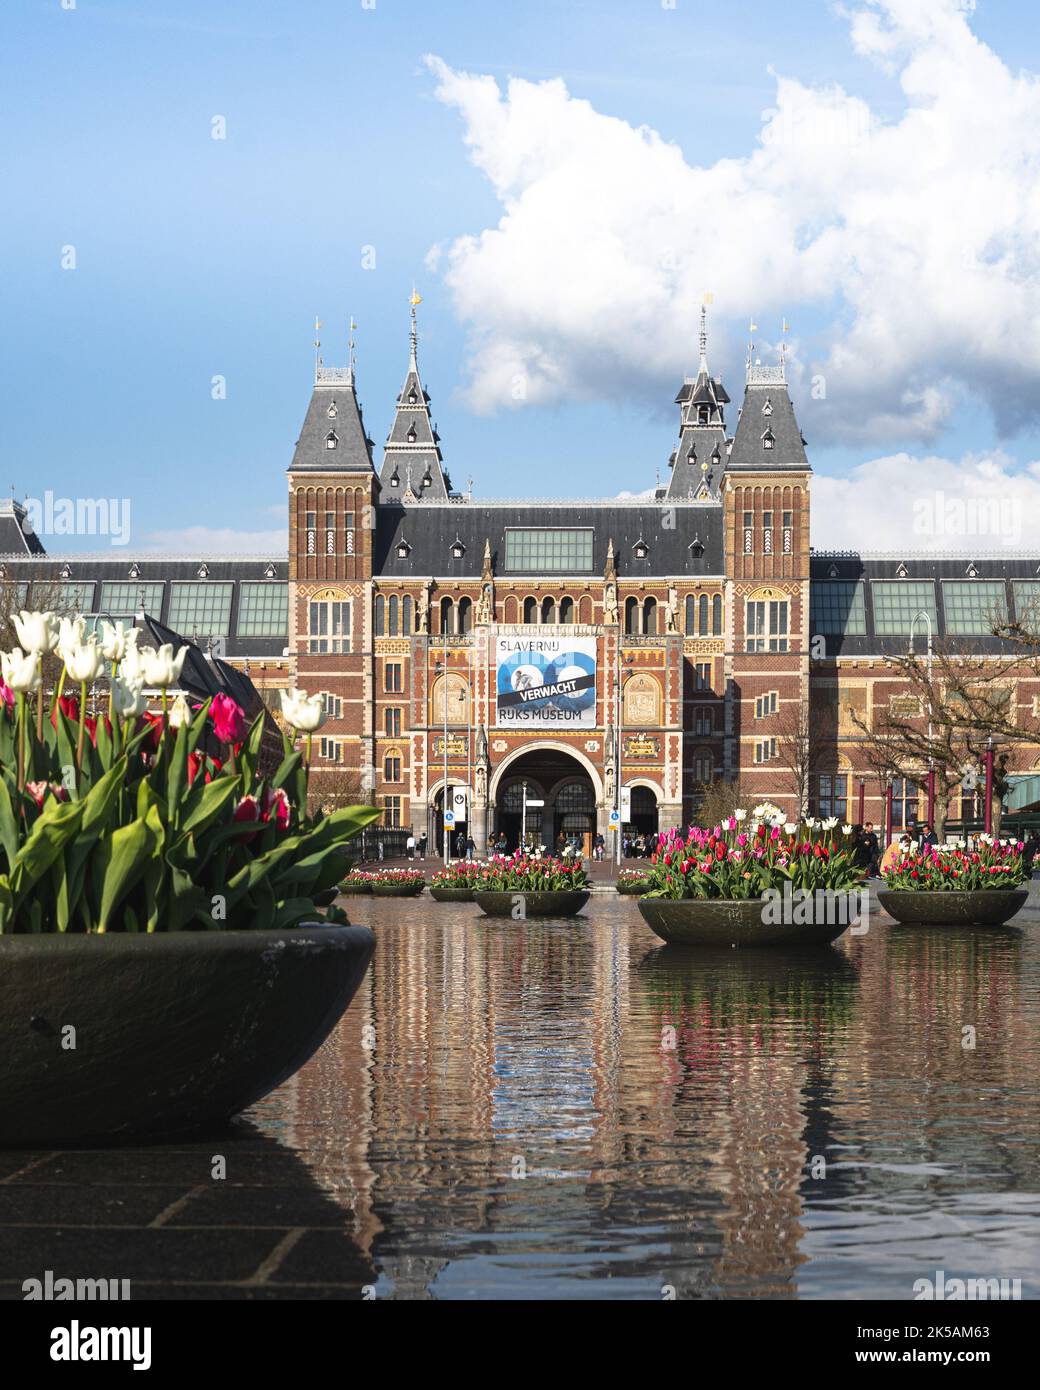 Rijksmuseum with Tulips Flowers in The Netherlands Amsterdam Holland Stock Photo